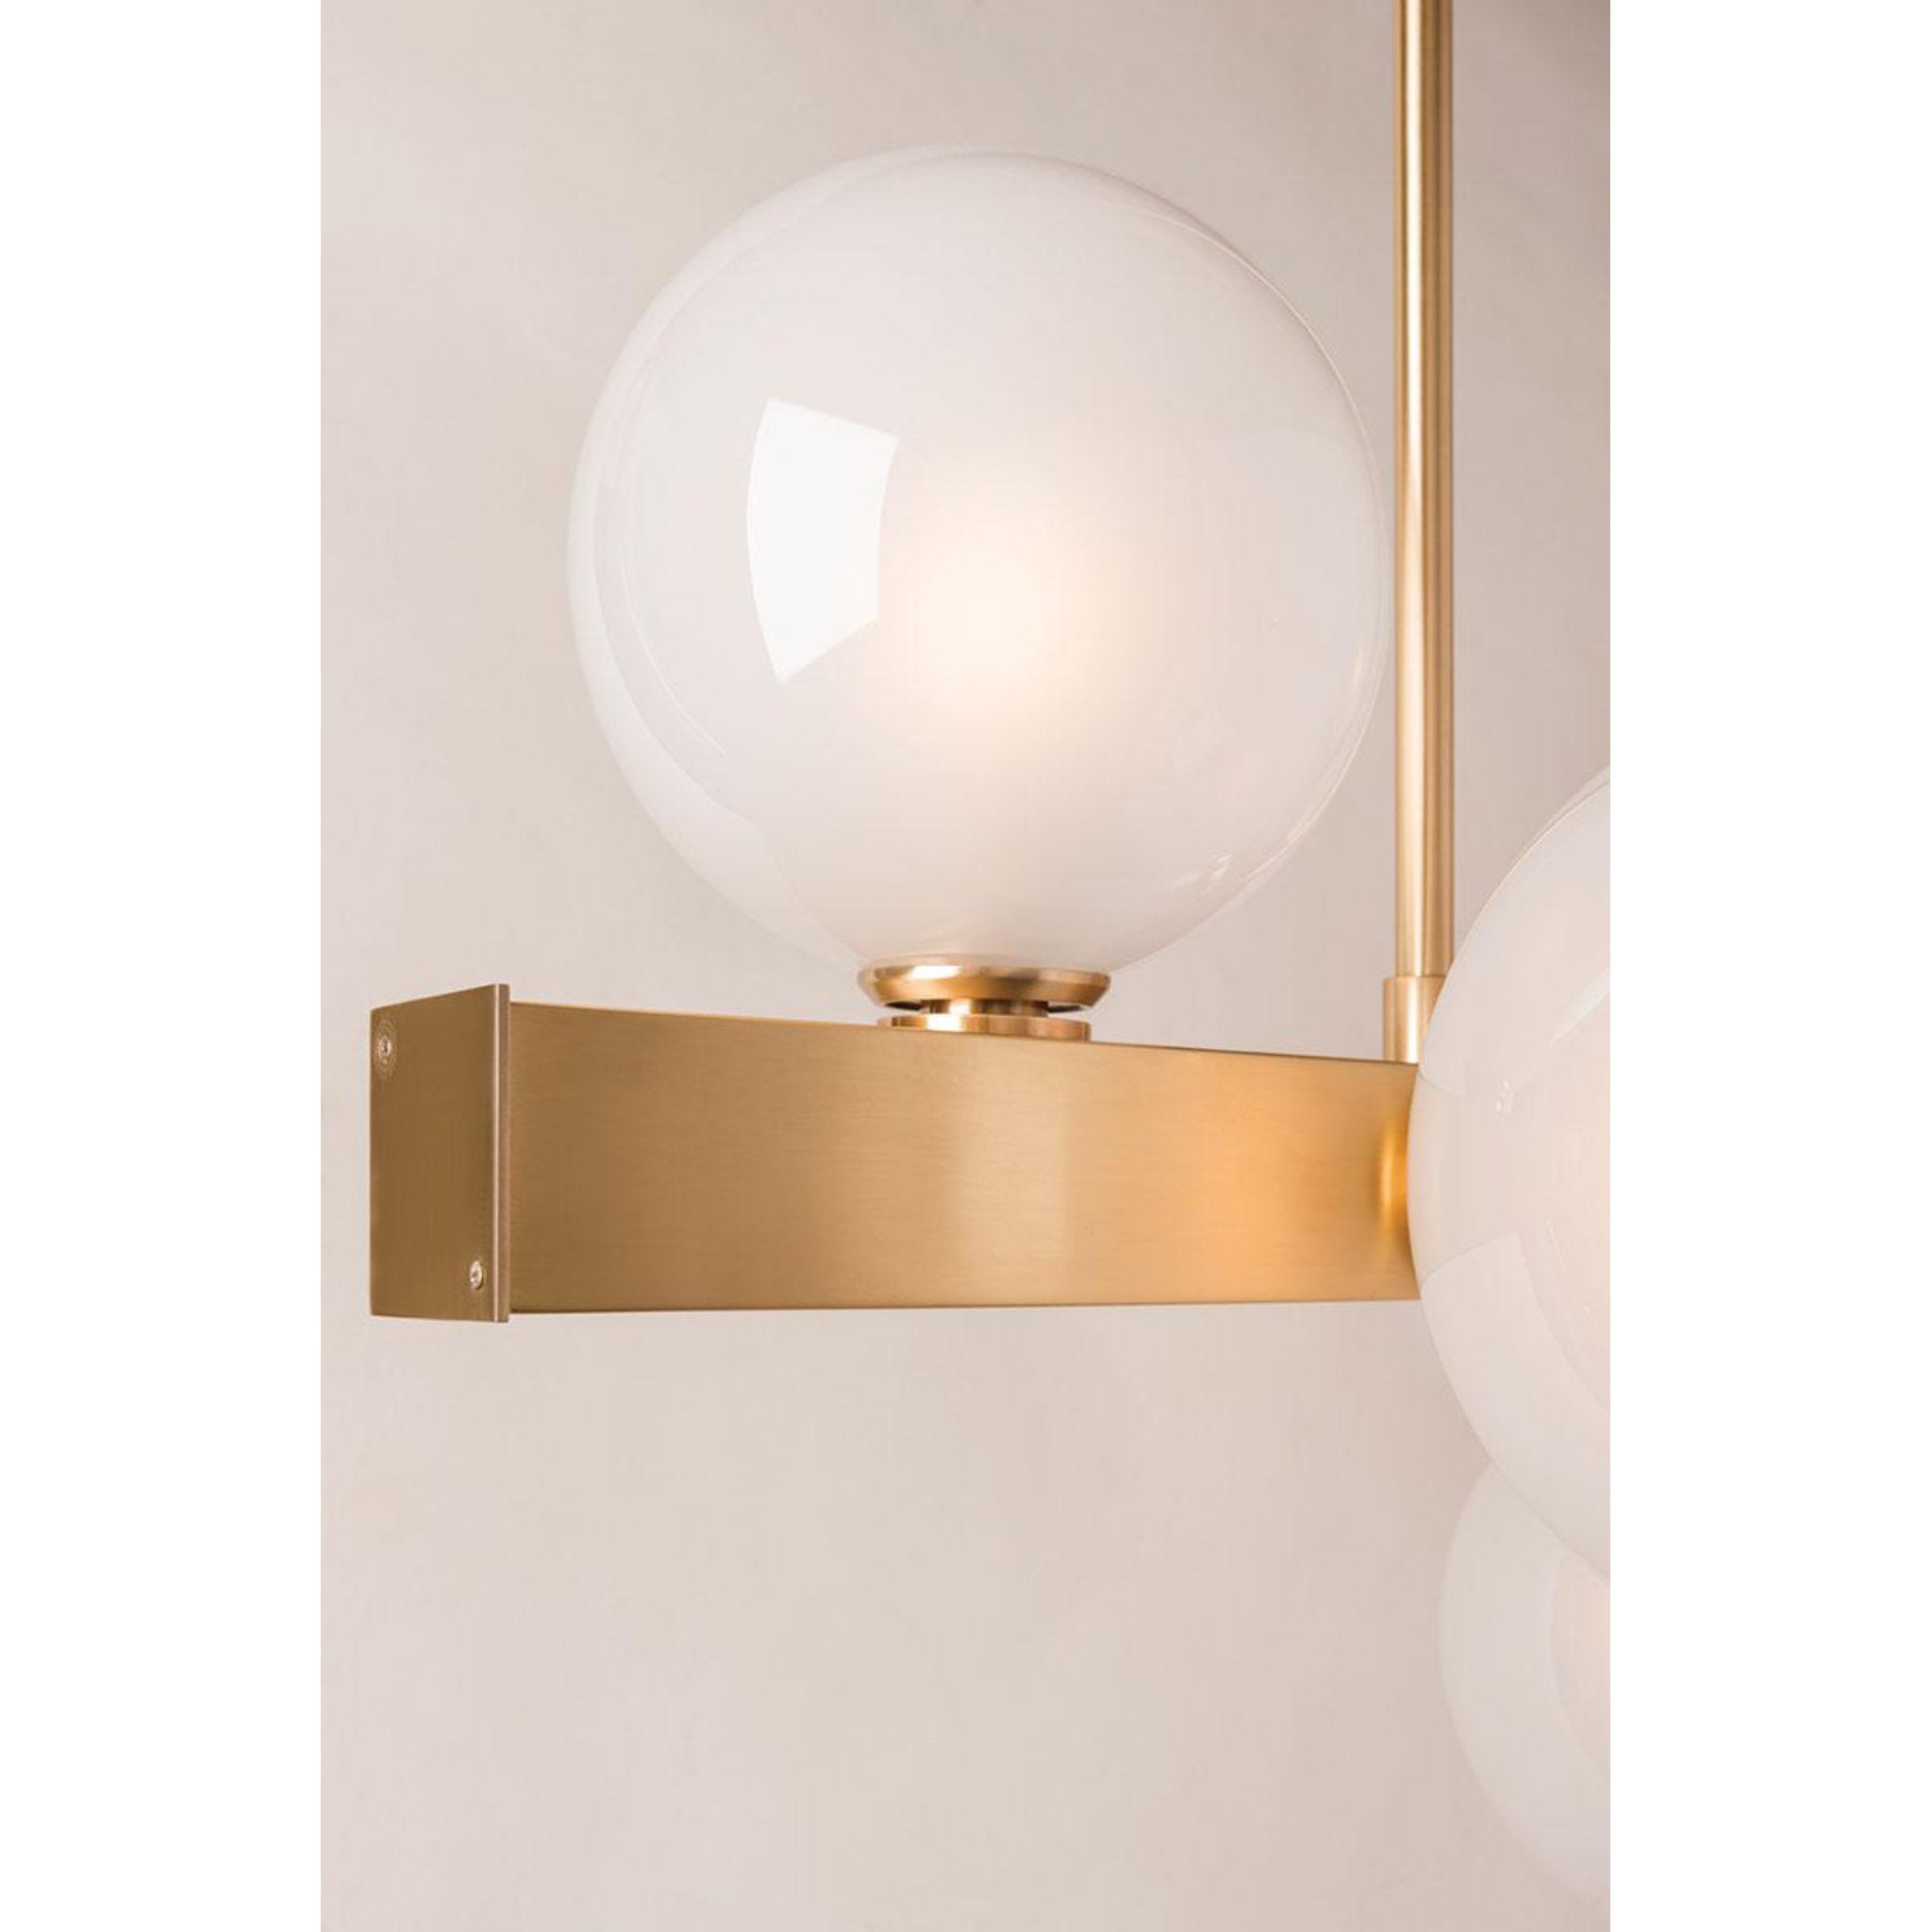 Hinsdale 1 Light Wall Sconce in Aged Brass